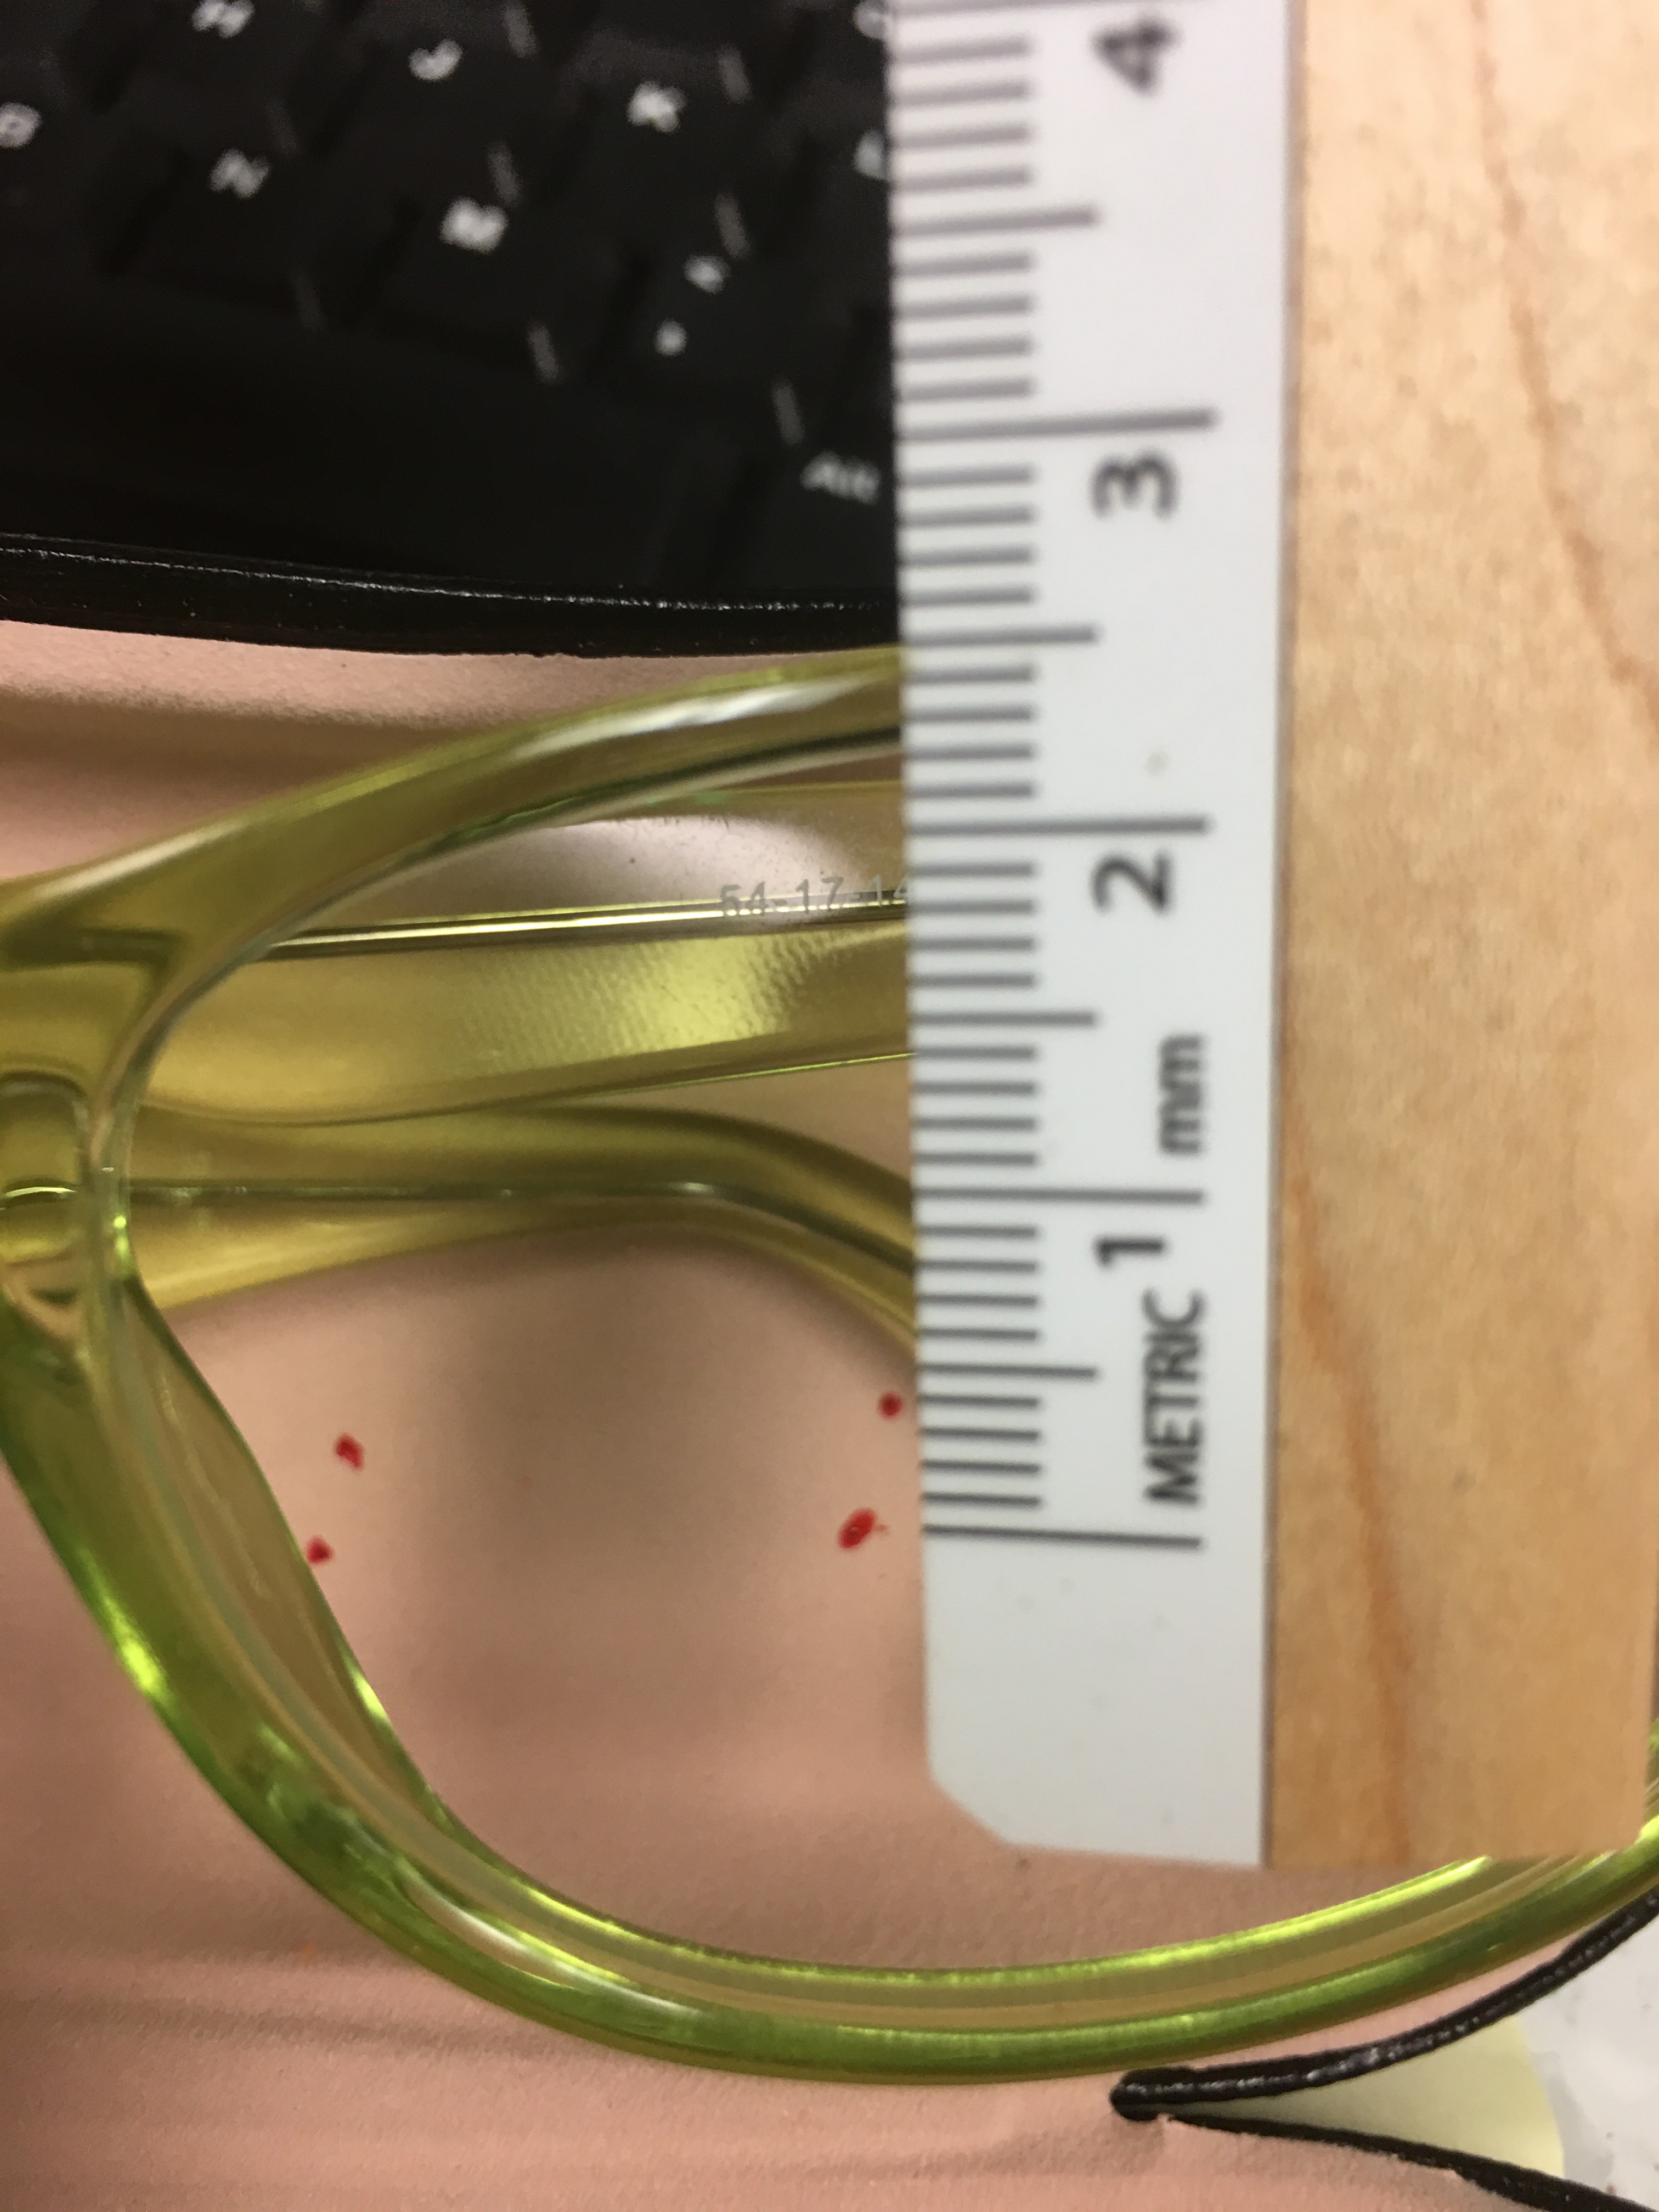 Glasses not cut evenly